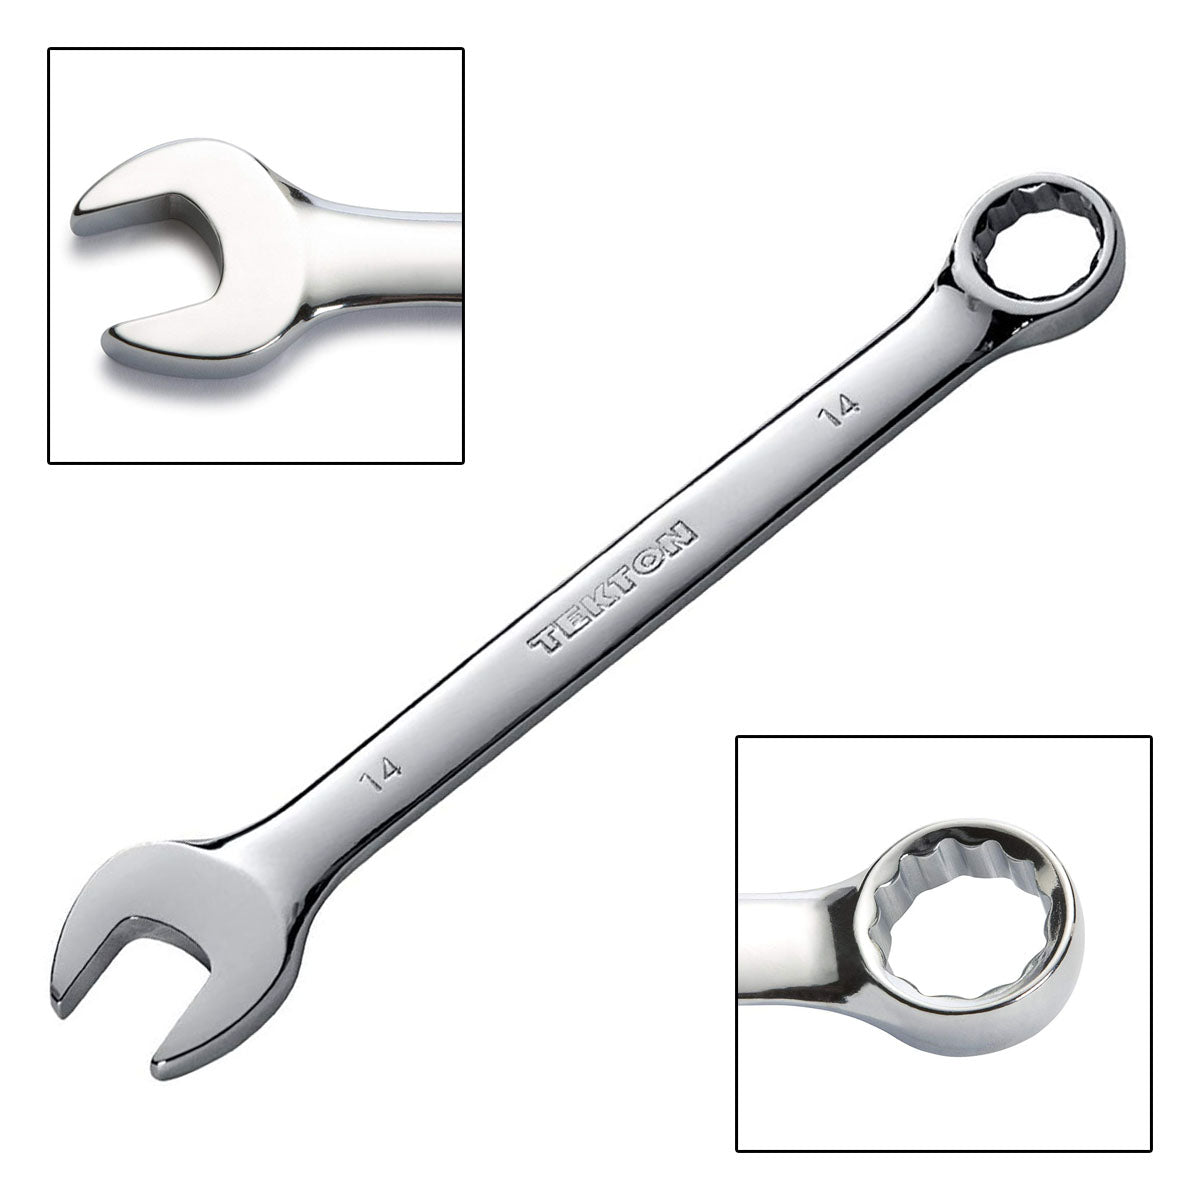 3/4 Double Head Spanner Wrench, 12 Point Combination, Grip Tight Tools